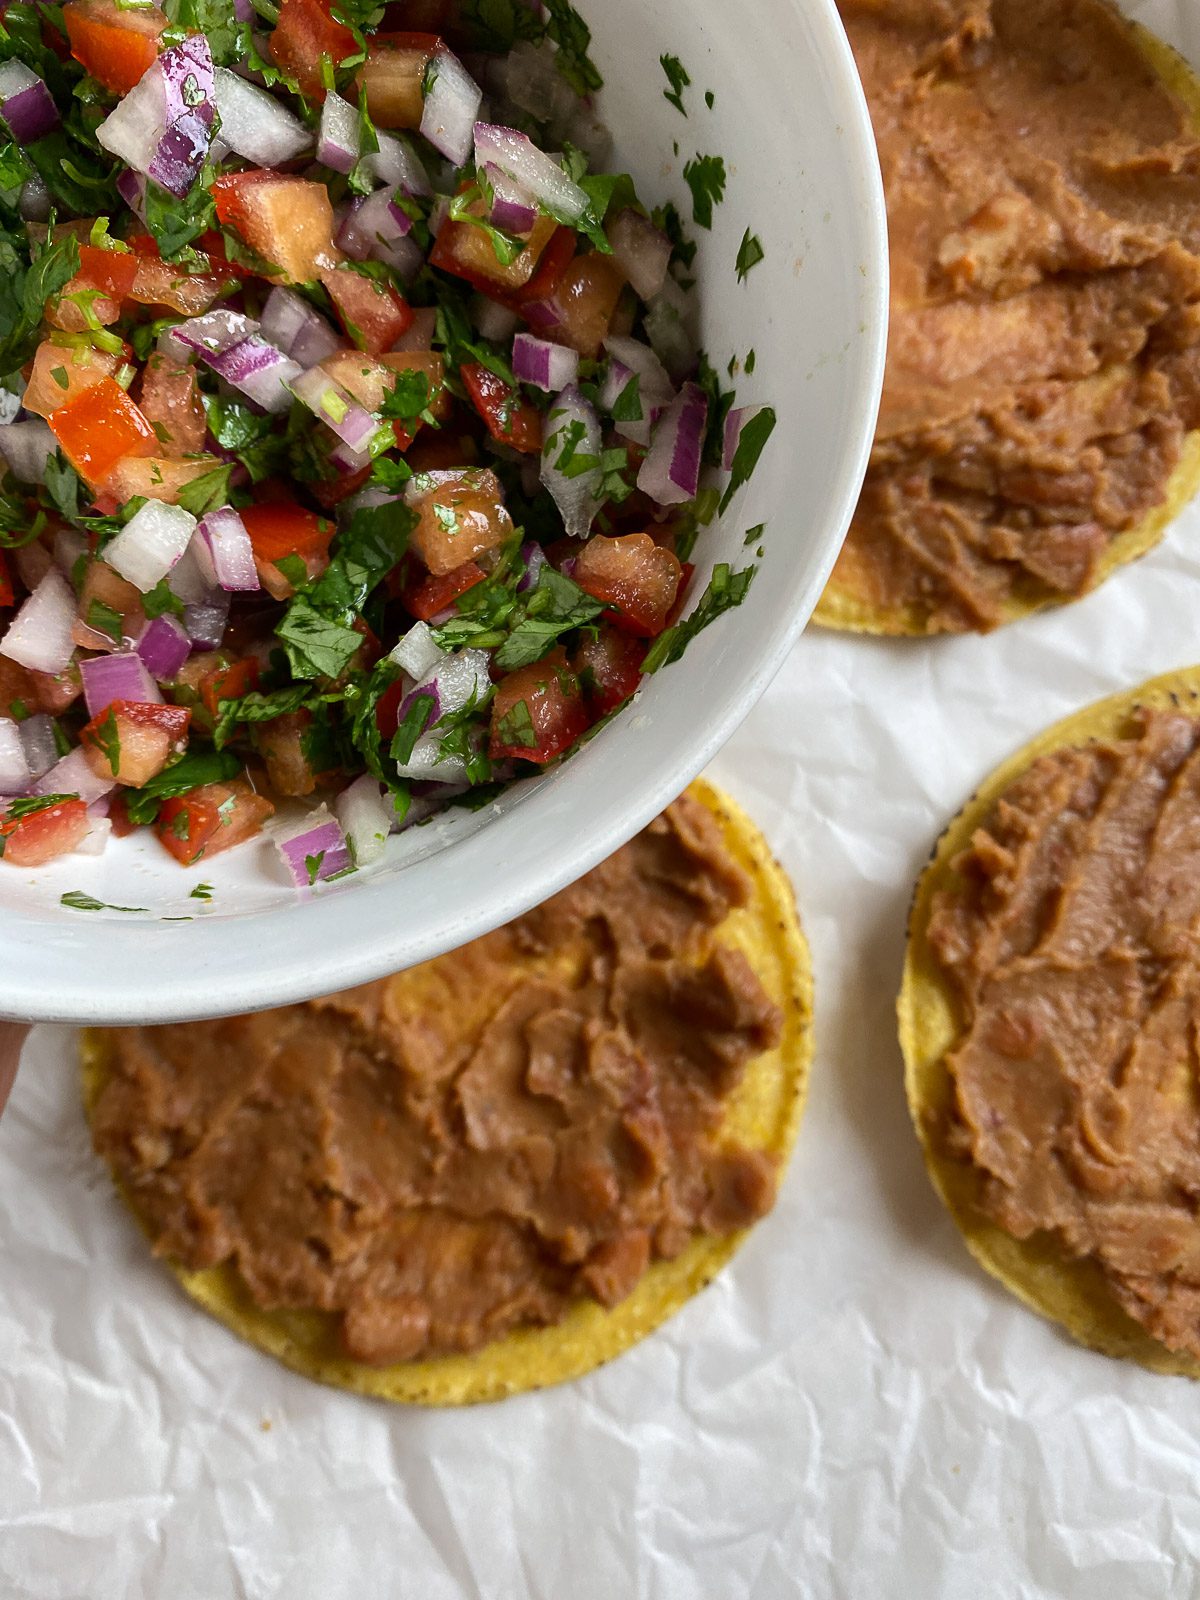 process of veggies being added on top of refried beans onto tostada shell